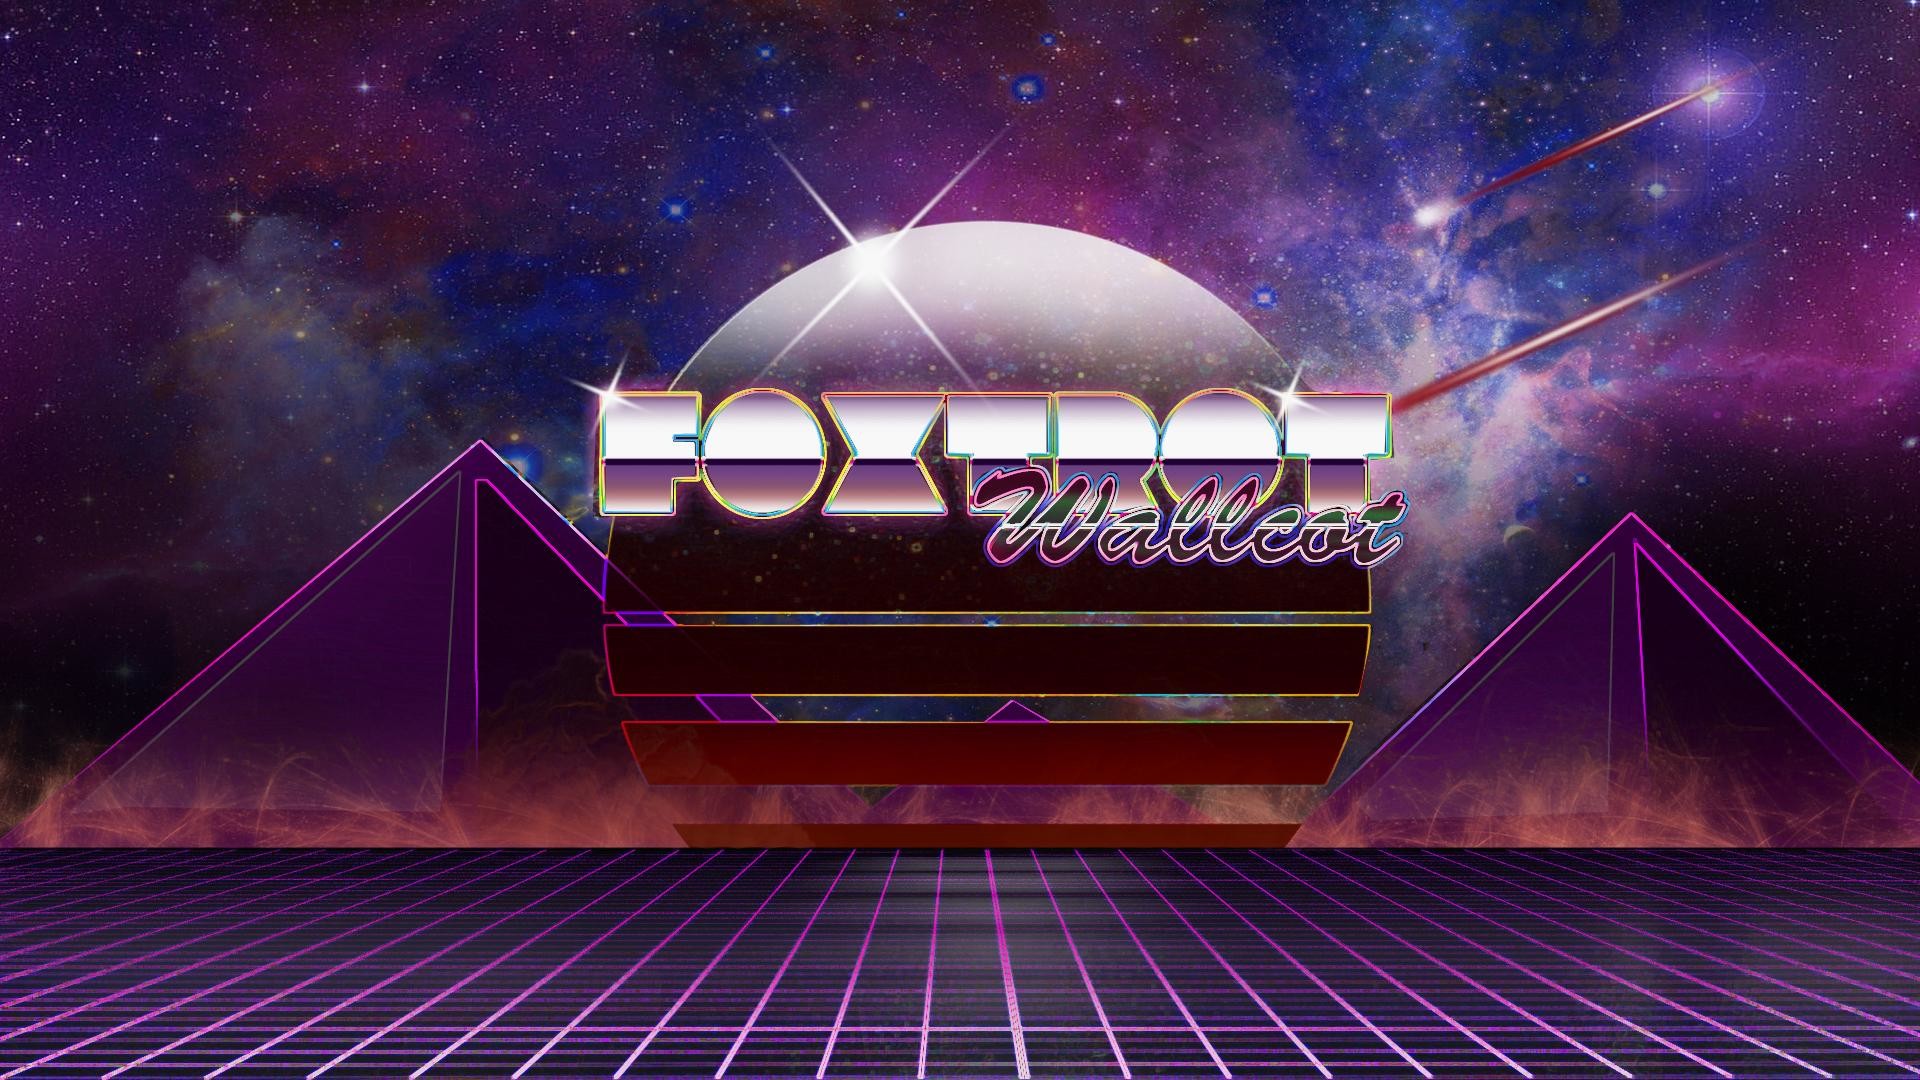 1920x1080 free synth wave style gamer tag covers ...